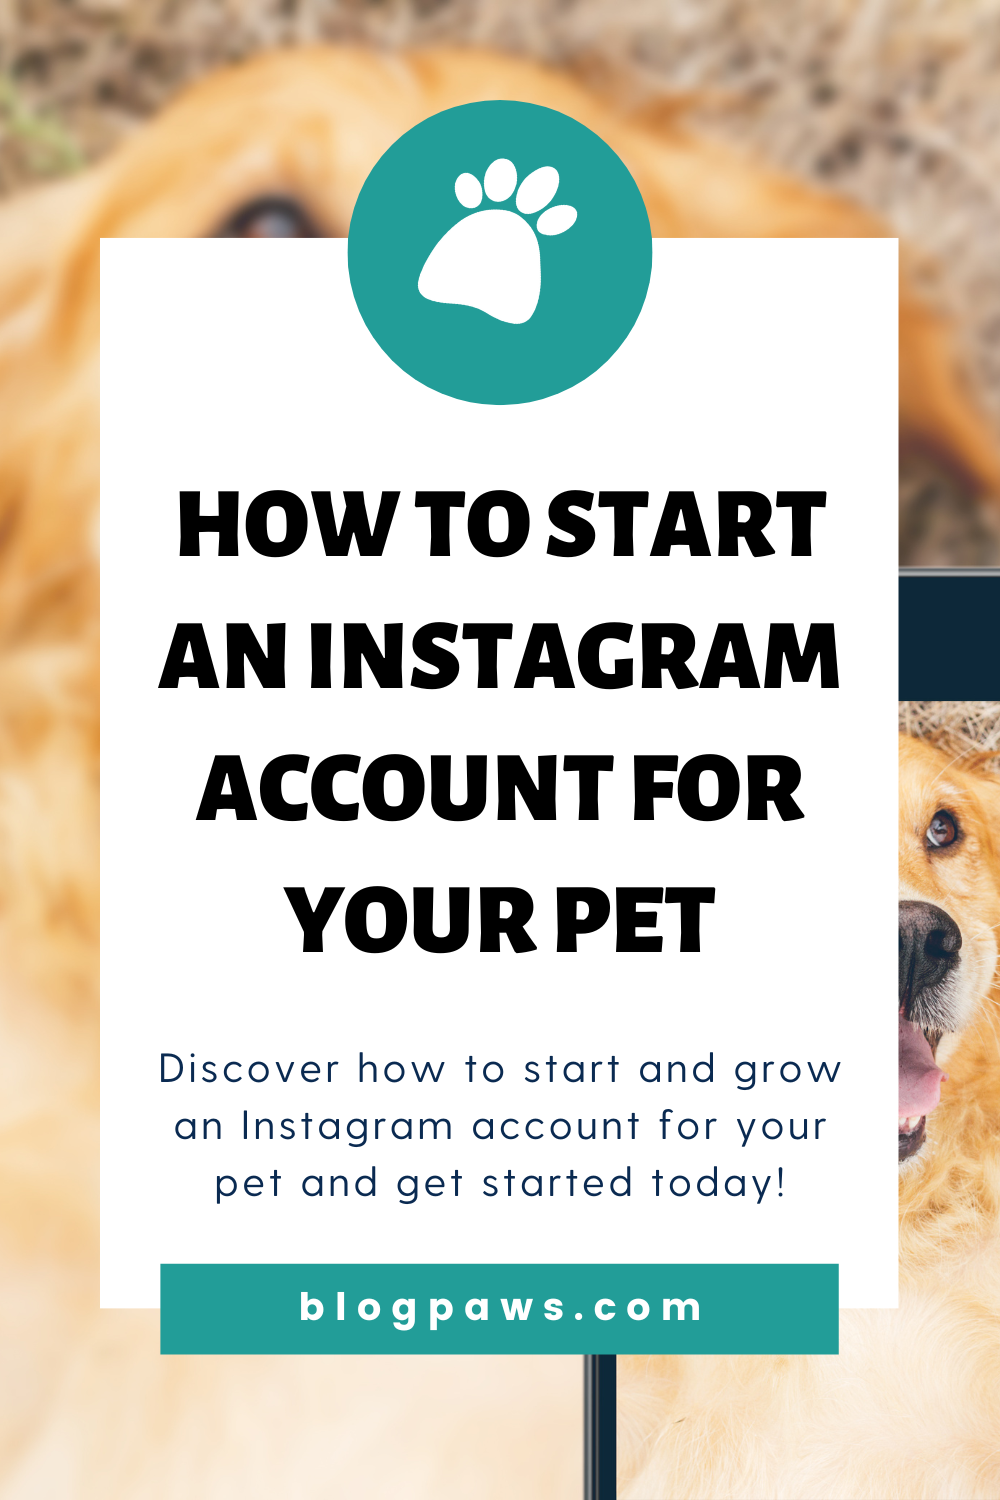 How to Start an Instagram Account for Your Pet - BlogPaws